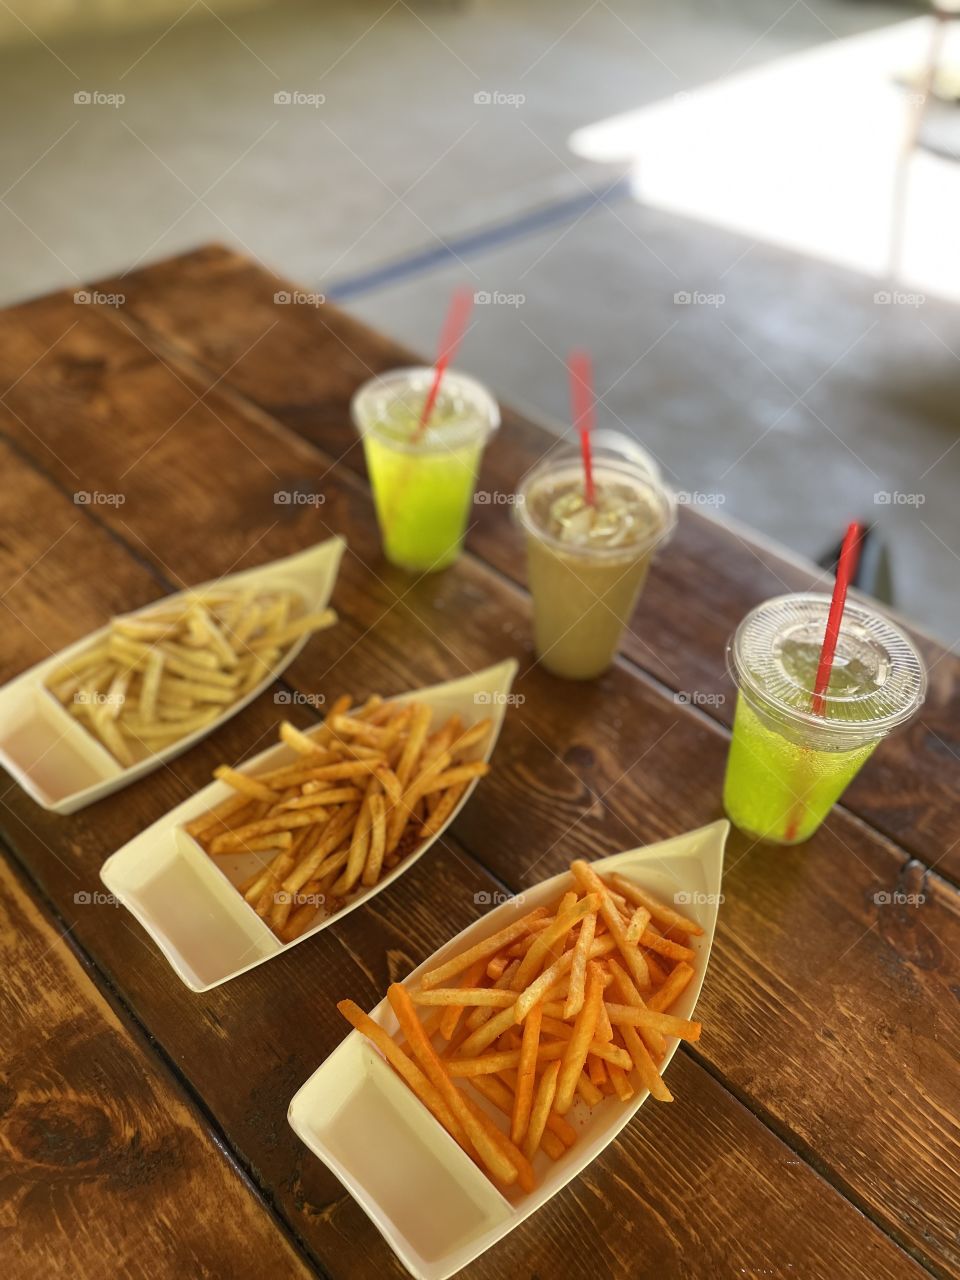 Three flavors of french fries with thirst quenching drinks.